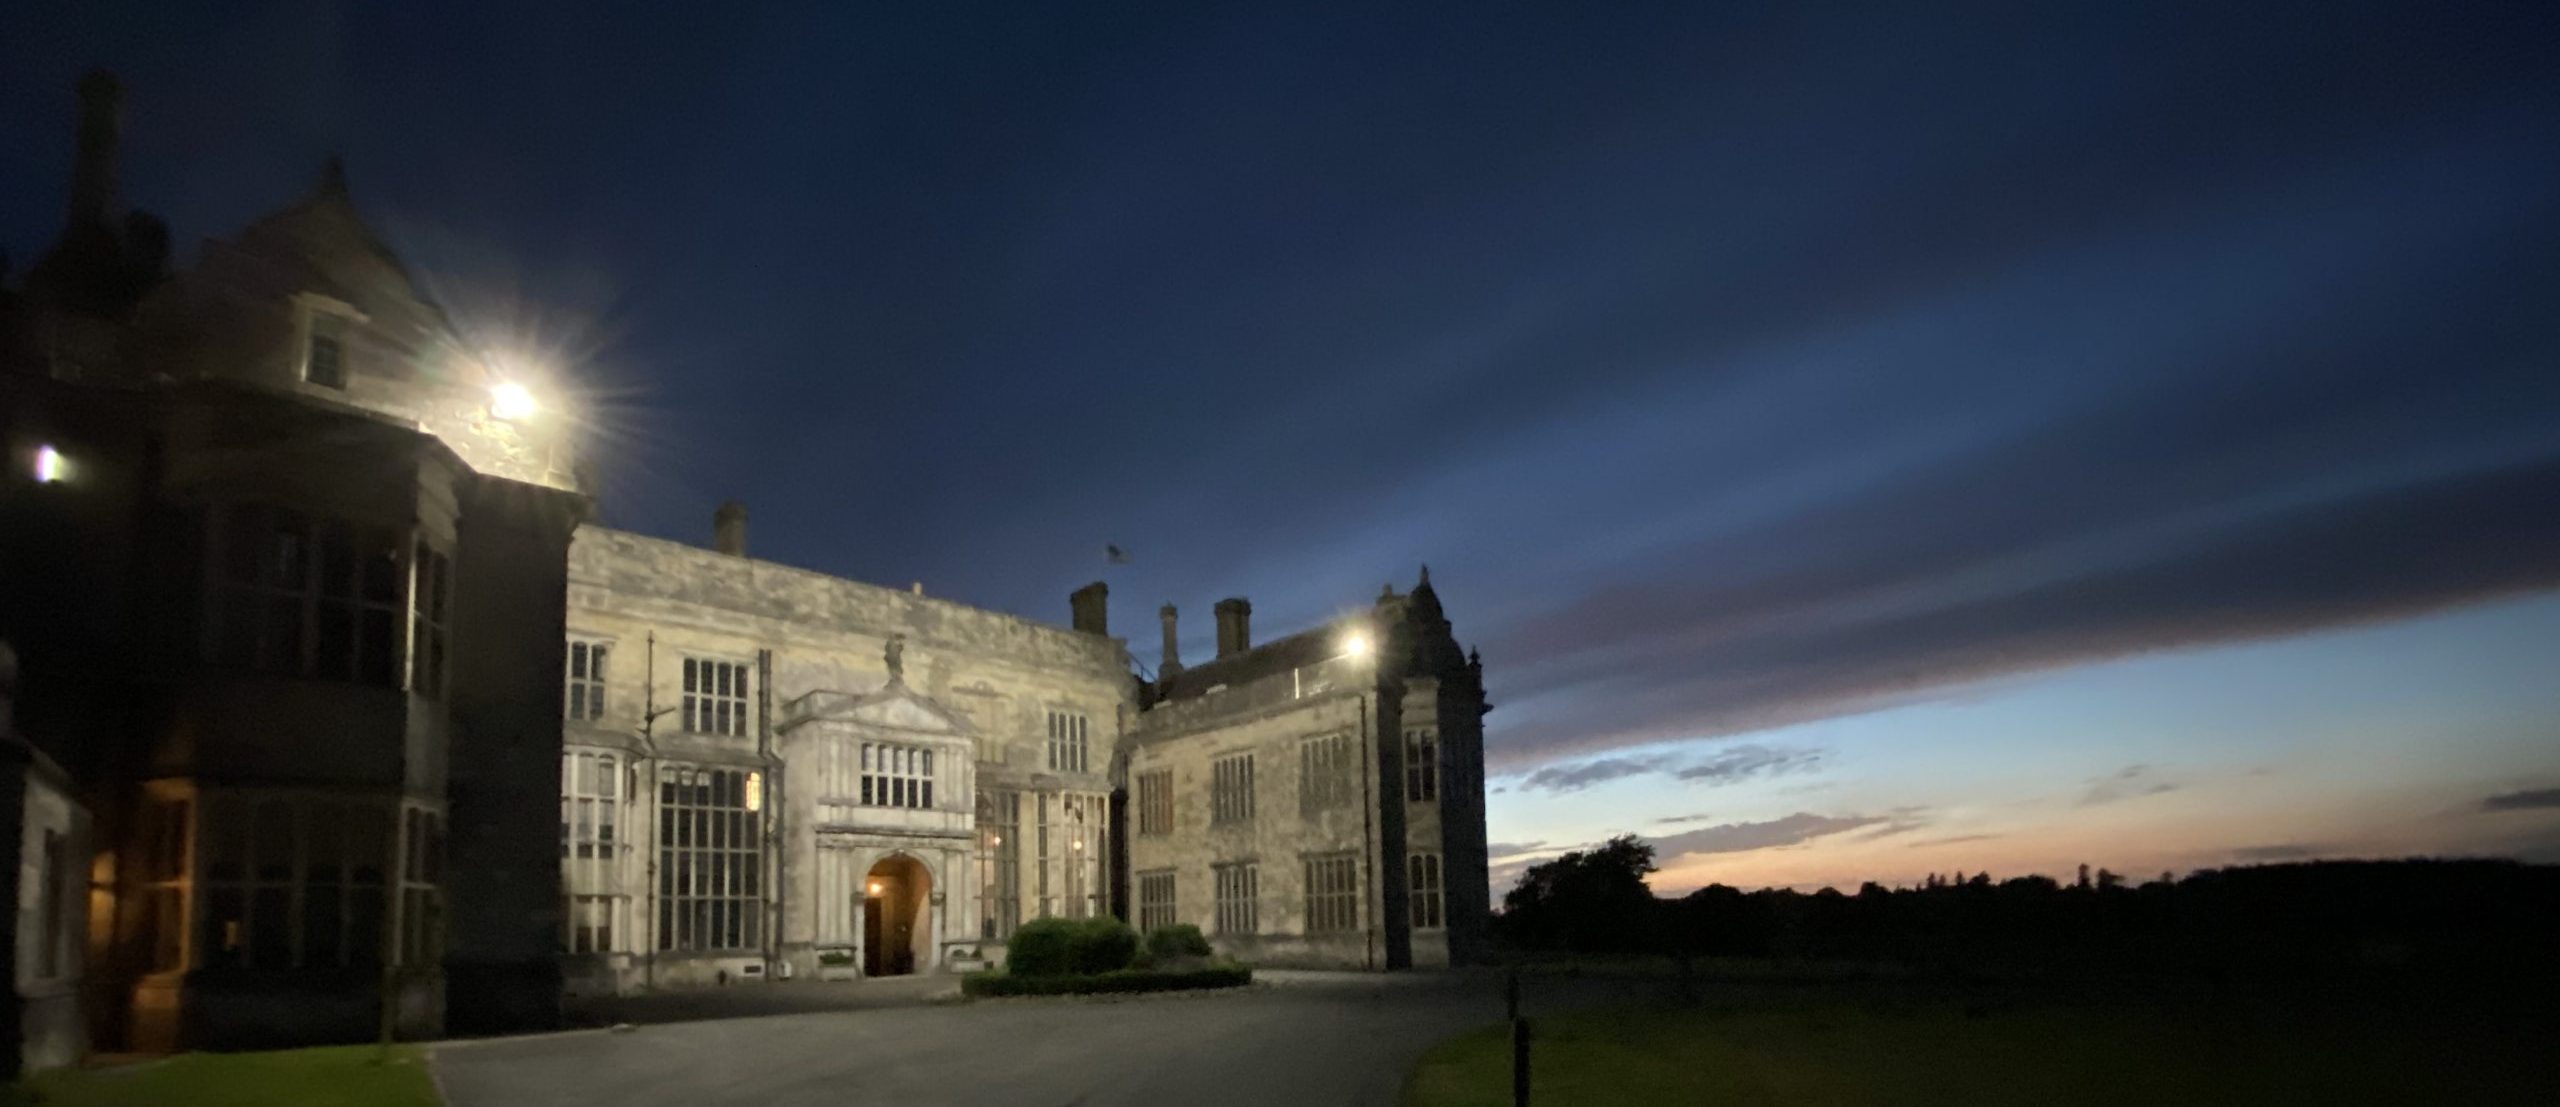 A stately home at dusk, with dramatic cloud formations overhead. 